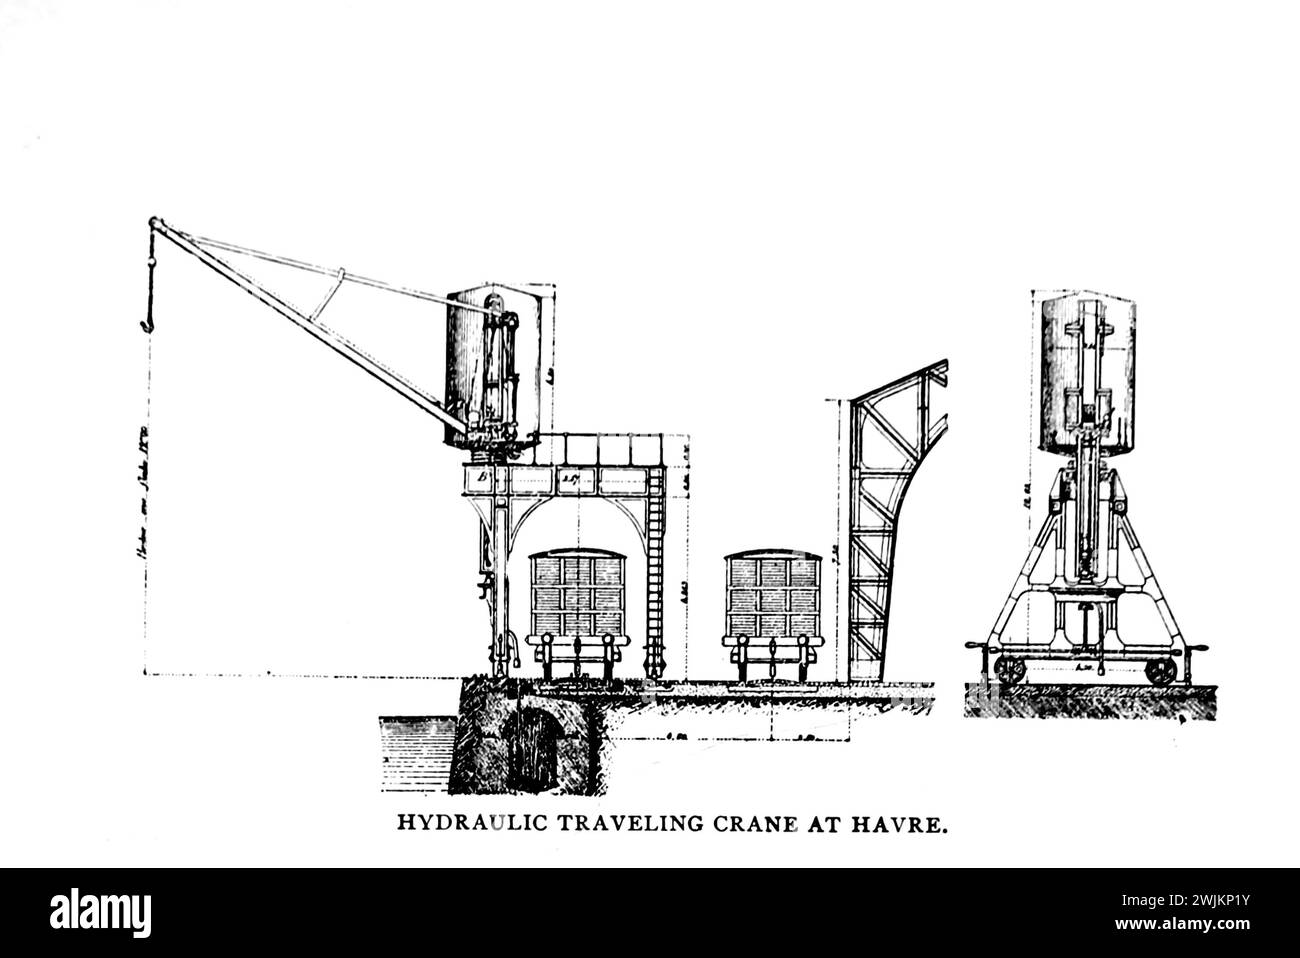 HYDRAULIC Traveling CRANE, Havre from the Article MODERN WHARF IMPROVEMENTS AND PORT FACILITIES. By Foster Crowell. from The Engineering Magazine Devoted to Industrial Progress Volume XIV October 1897 - March 1898 The Engineering Magazine Co Stock Photo